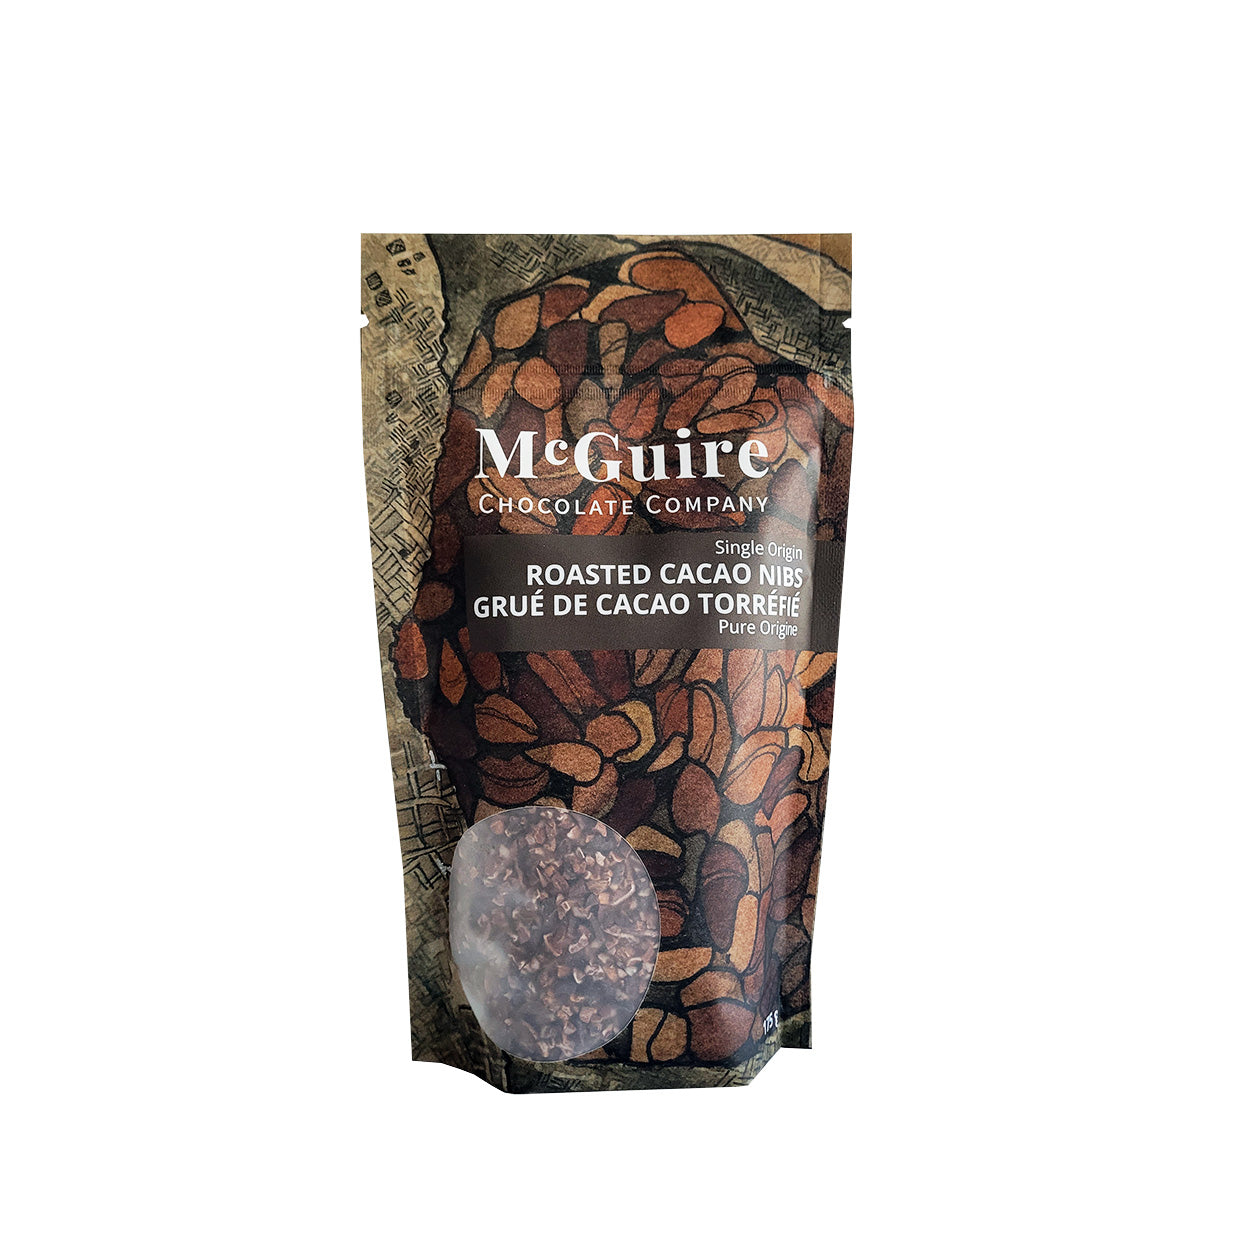 McGuire Roasted Cacao Nibs in a beautiful bag